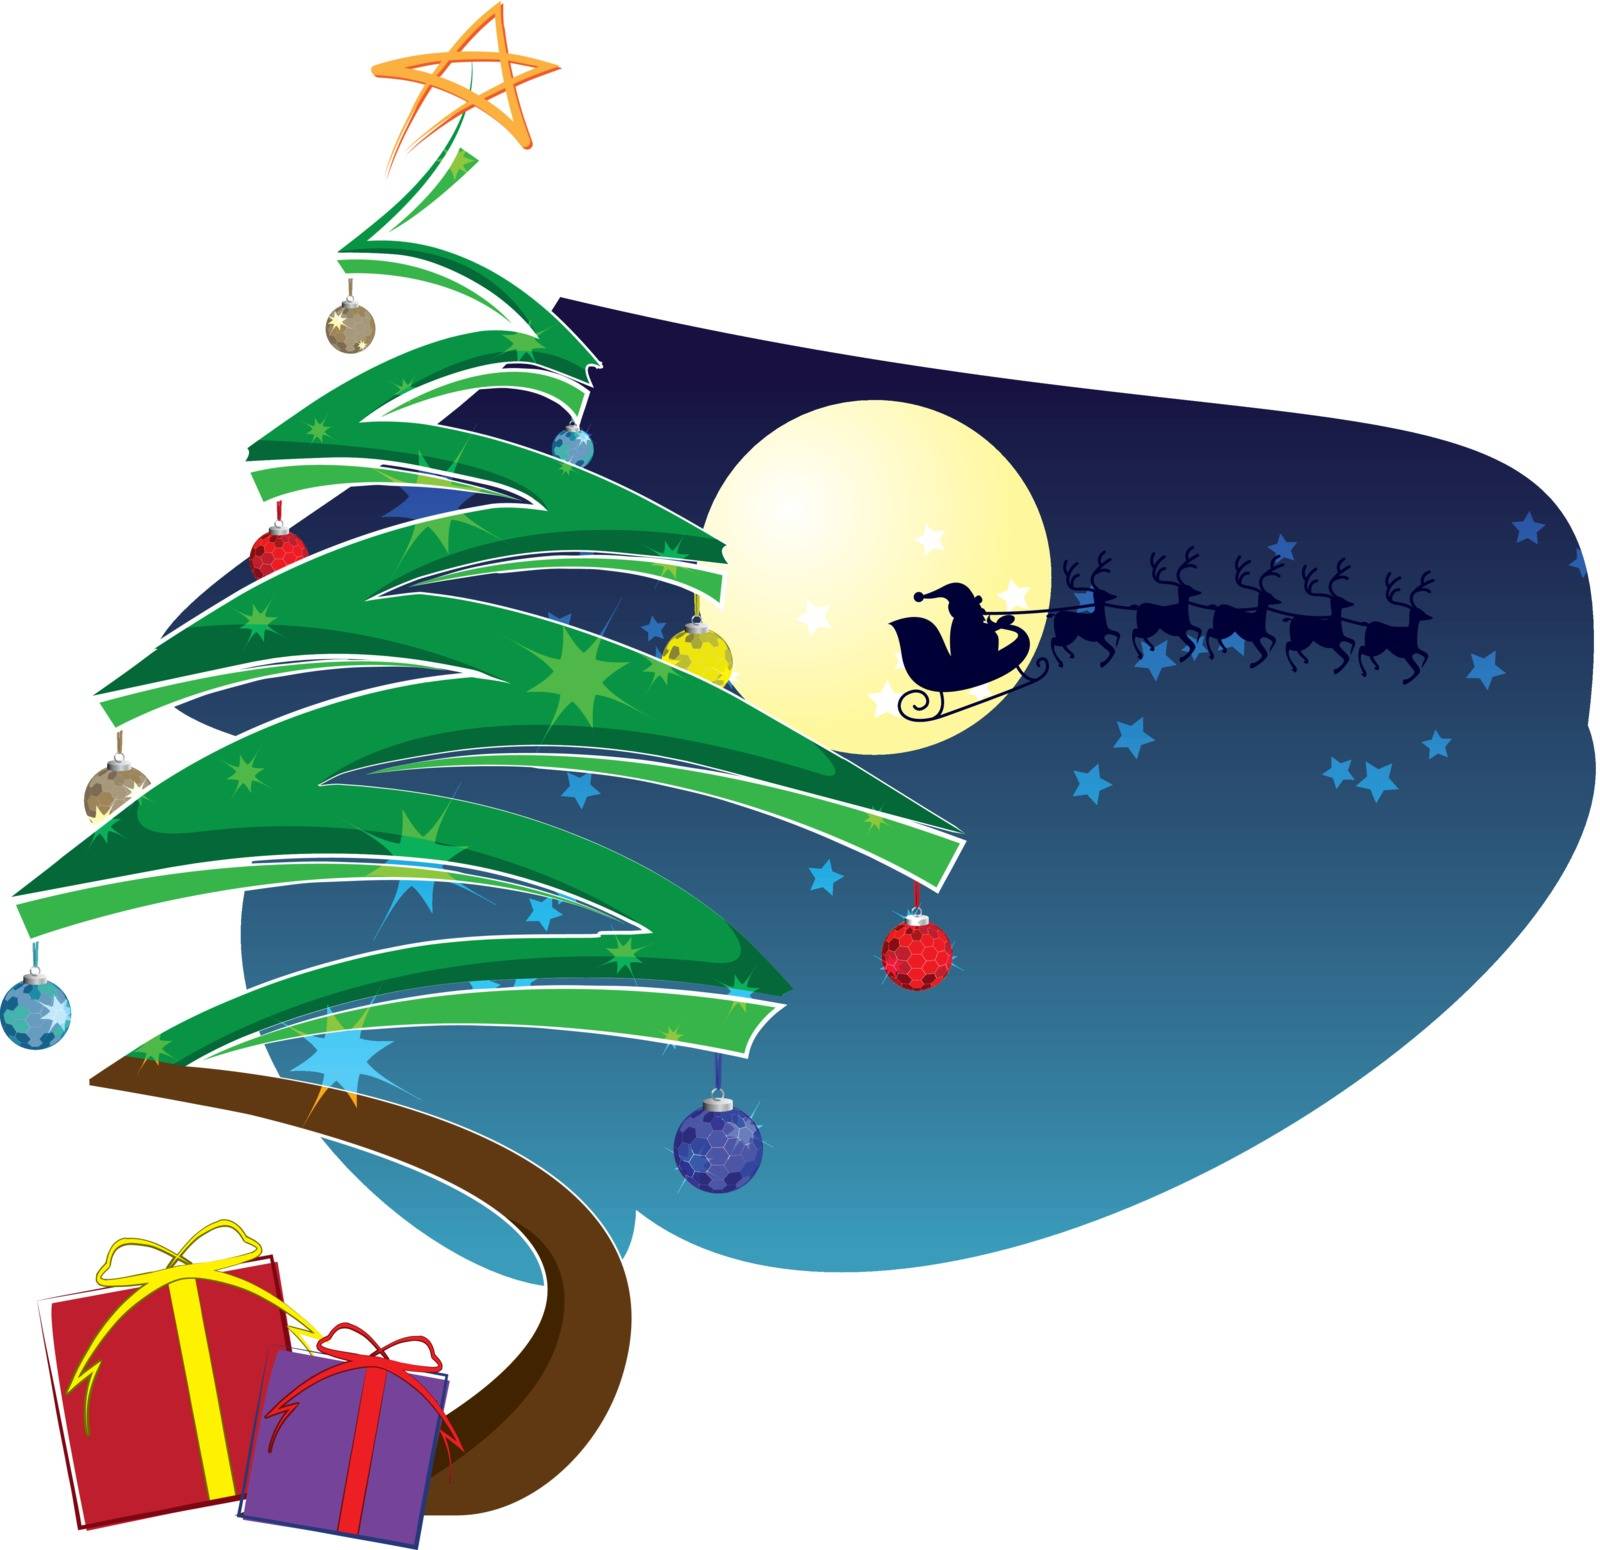 Illustration of Christmas night with Christmas tree and gift for decorative and background